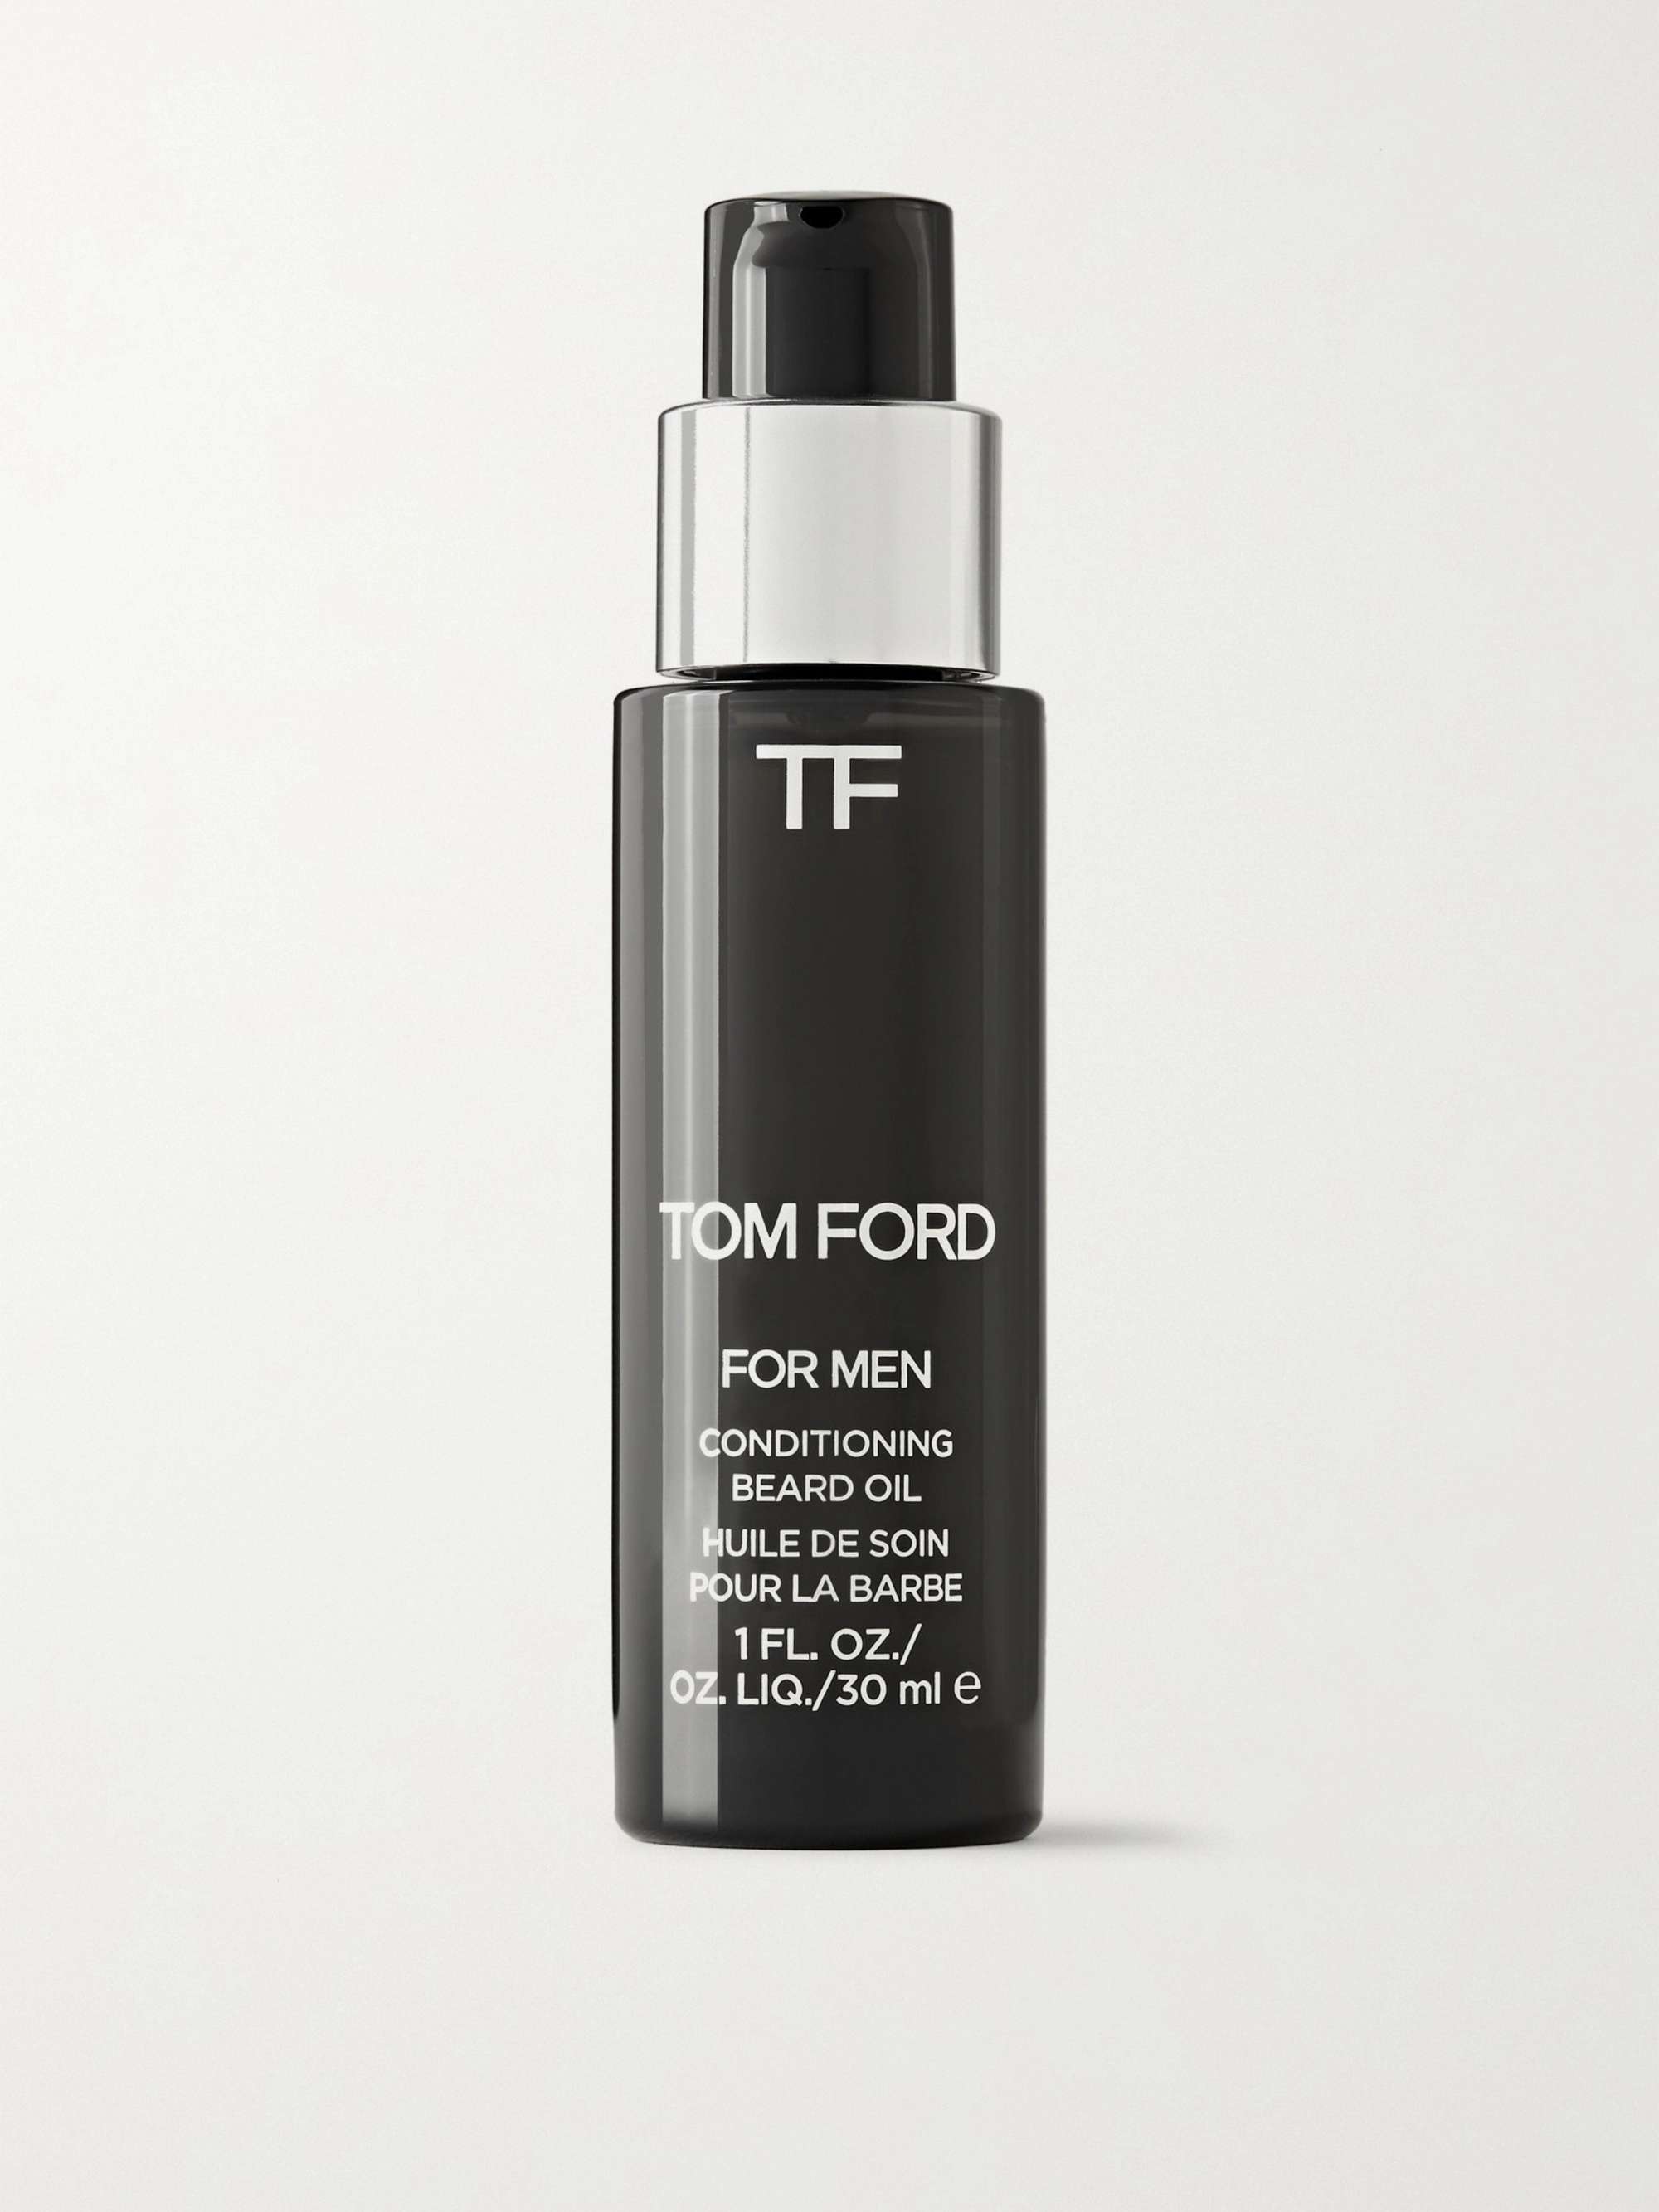 TOM FORD BEAUTY Oud Wood Conditioning Beard Oil, 30ml